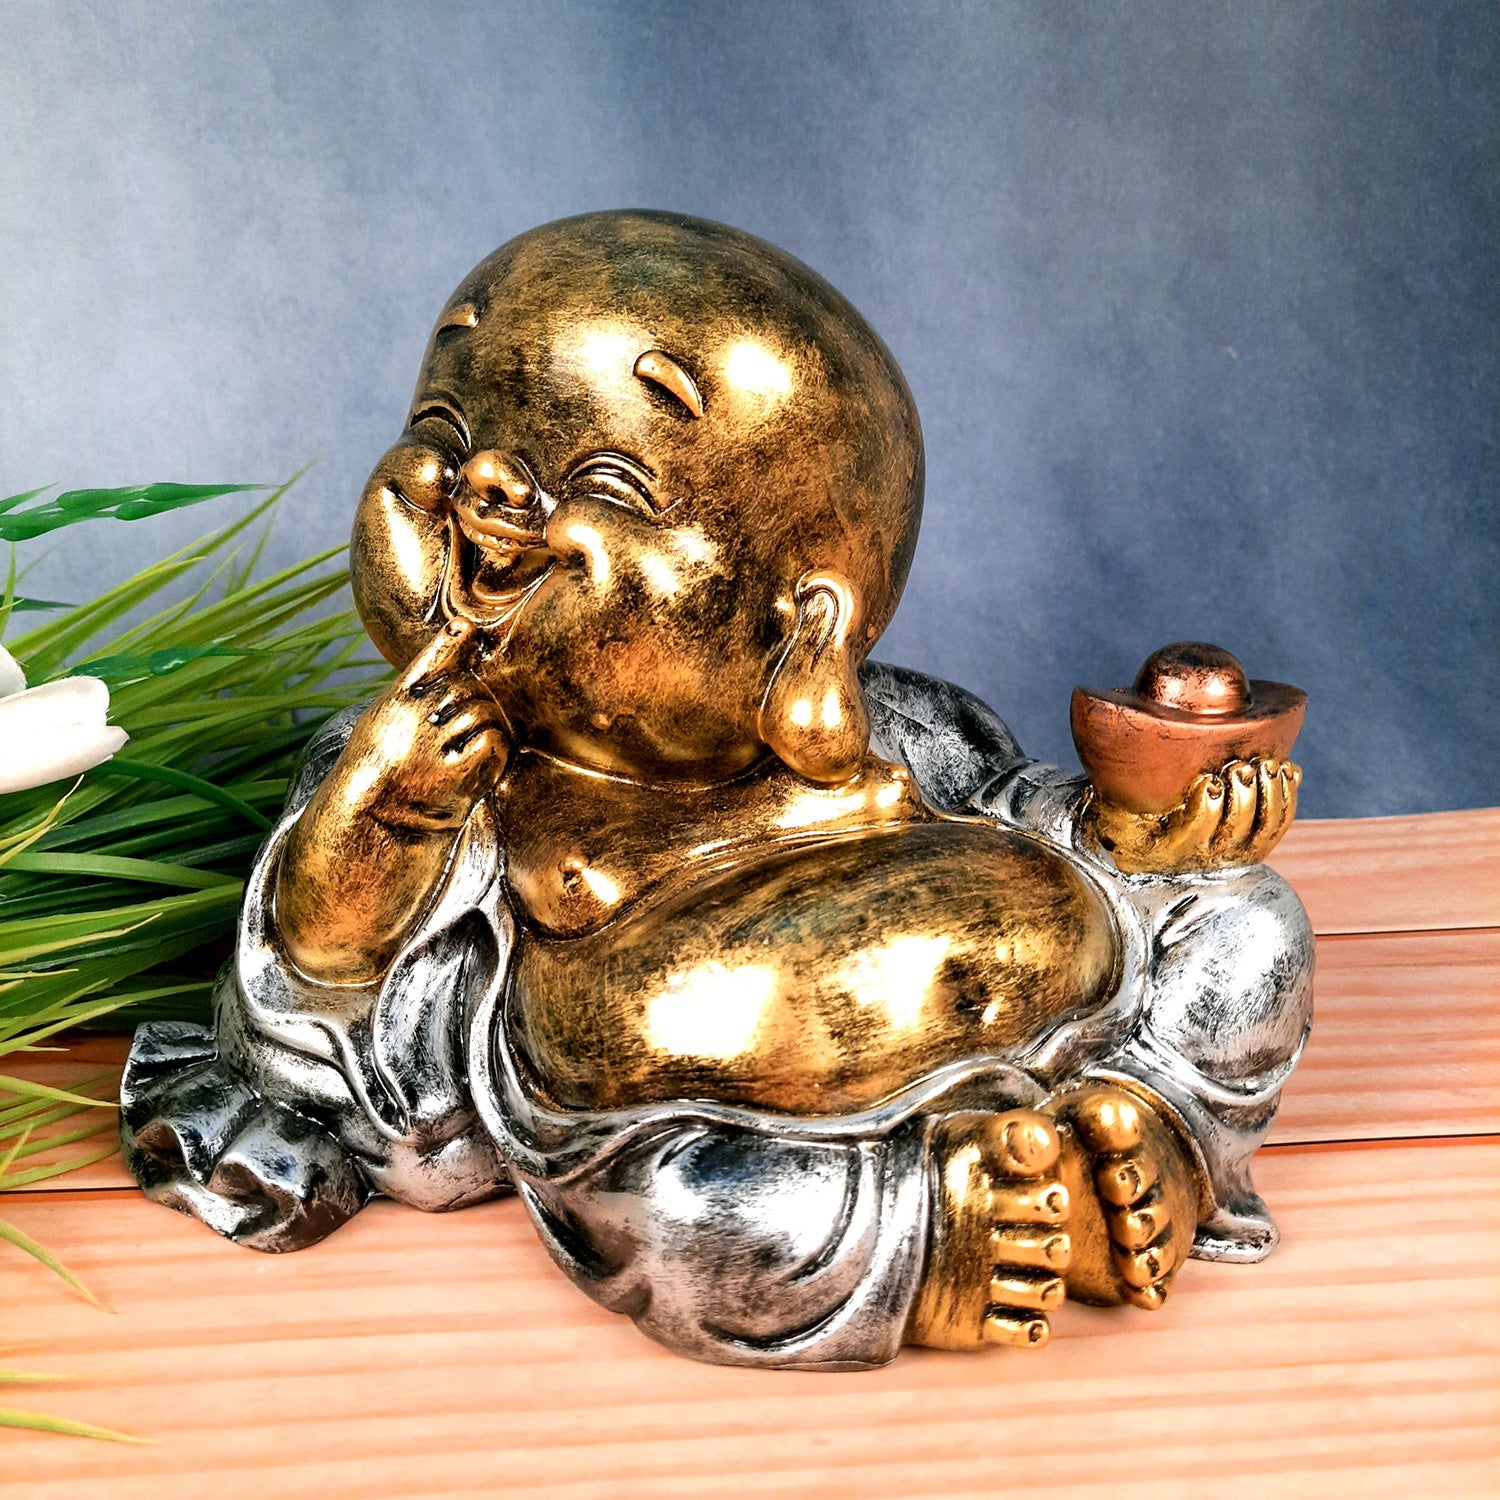 Amazon.com: Gift Take Laughing Buddha Showpiece for Health Wealth Money and  Good Luck, Laughing Budha with Potli - White & Golden, 11x10x14cm(5.5 inch)  Made in India : לבית ולמטבח